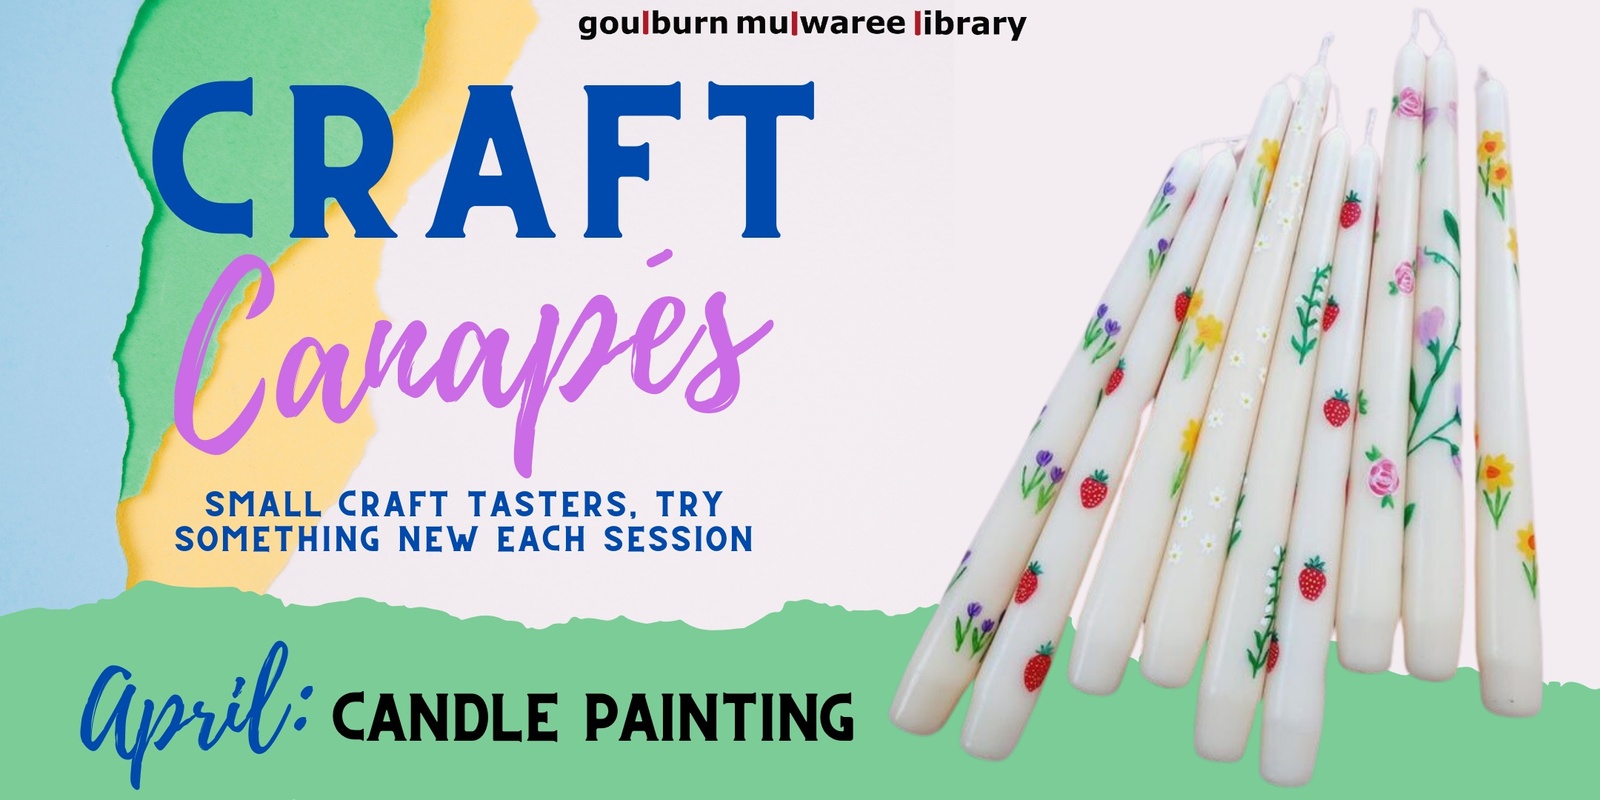 Banner image for Craft Canapés - Candle Painting